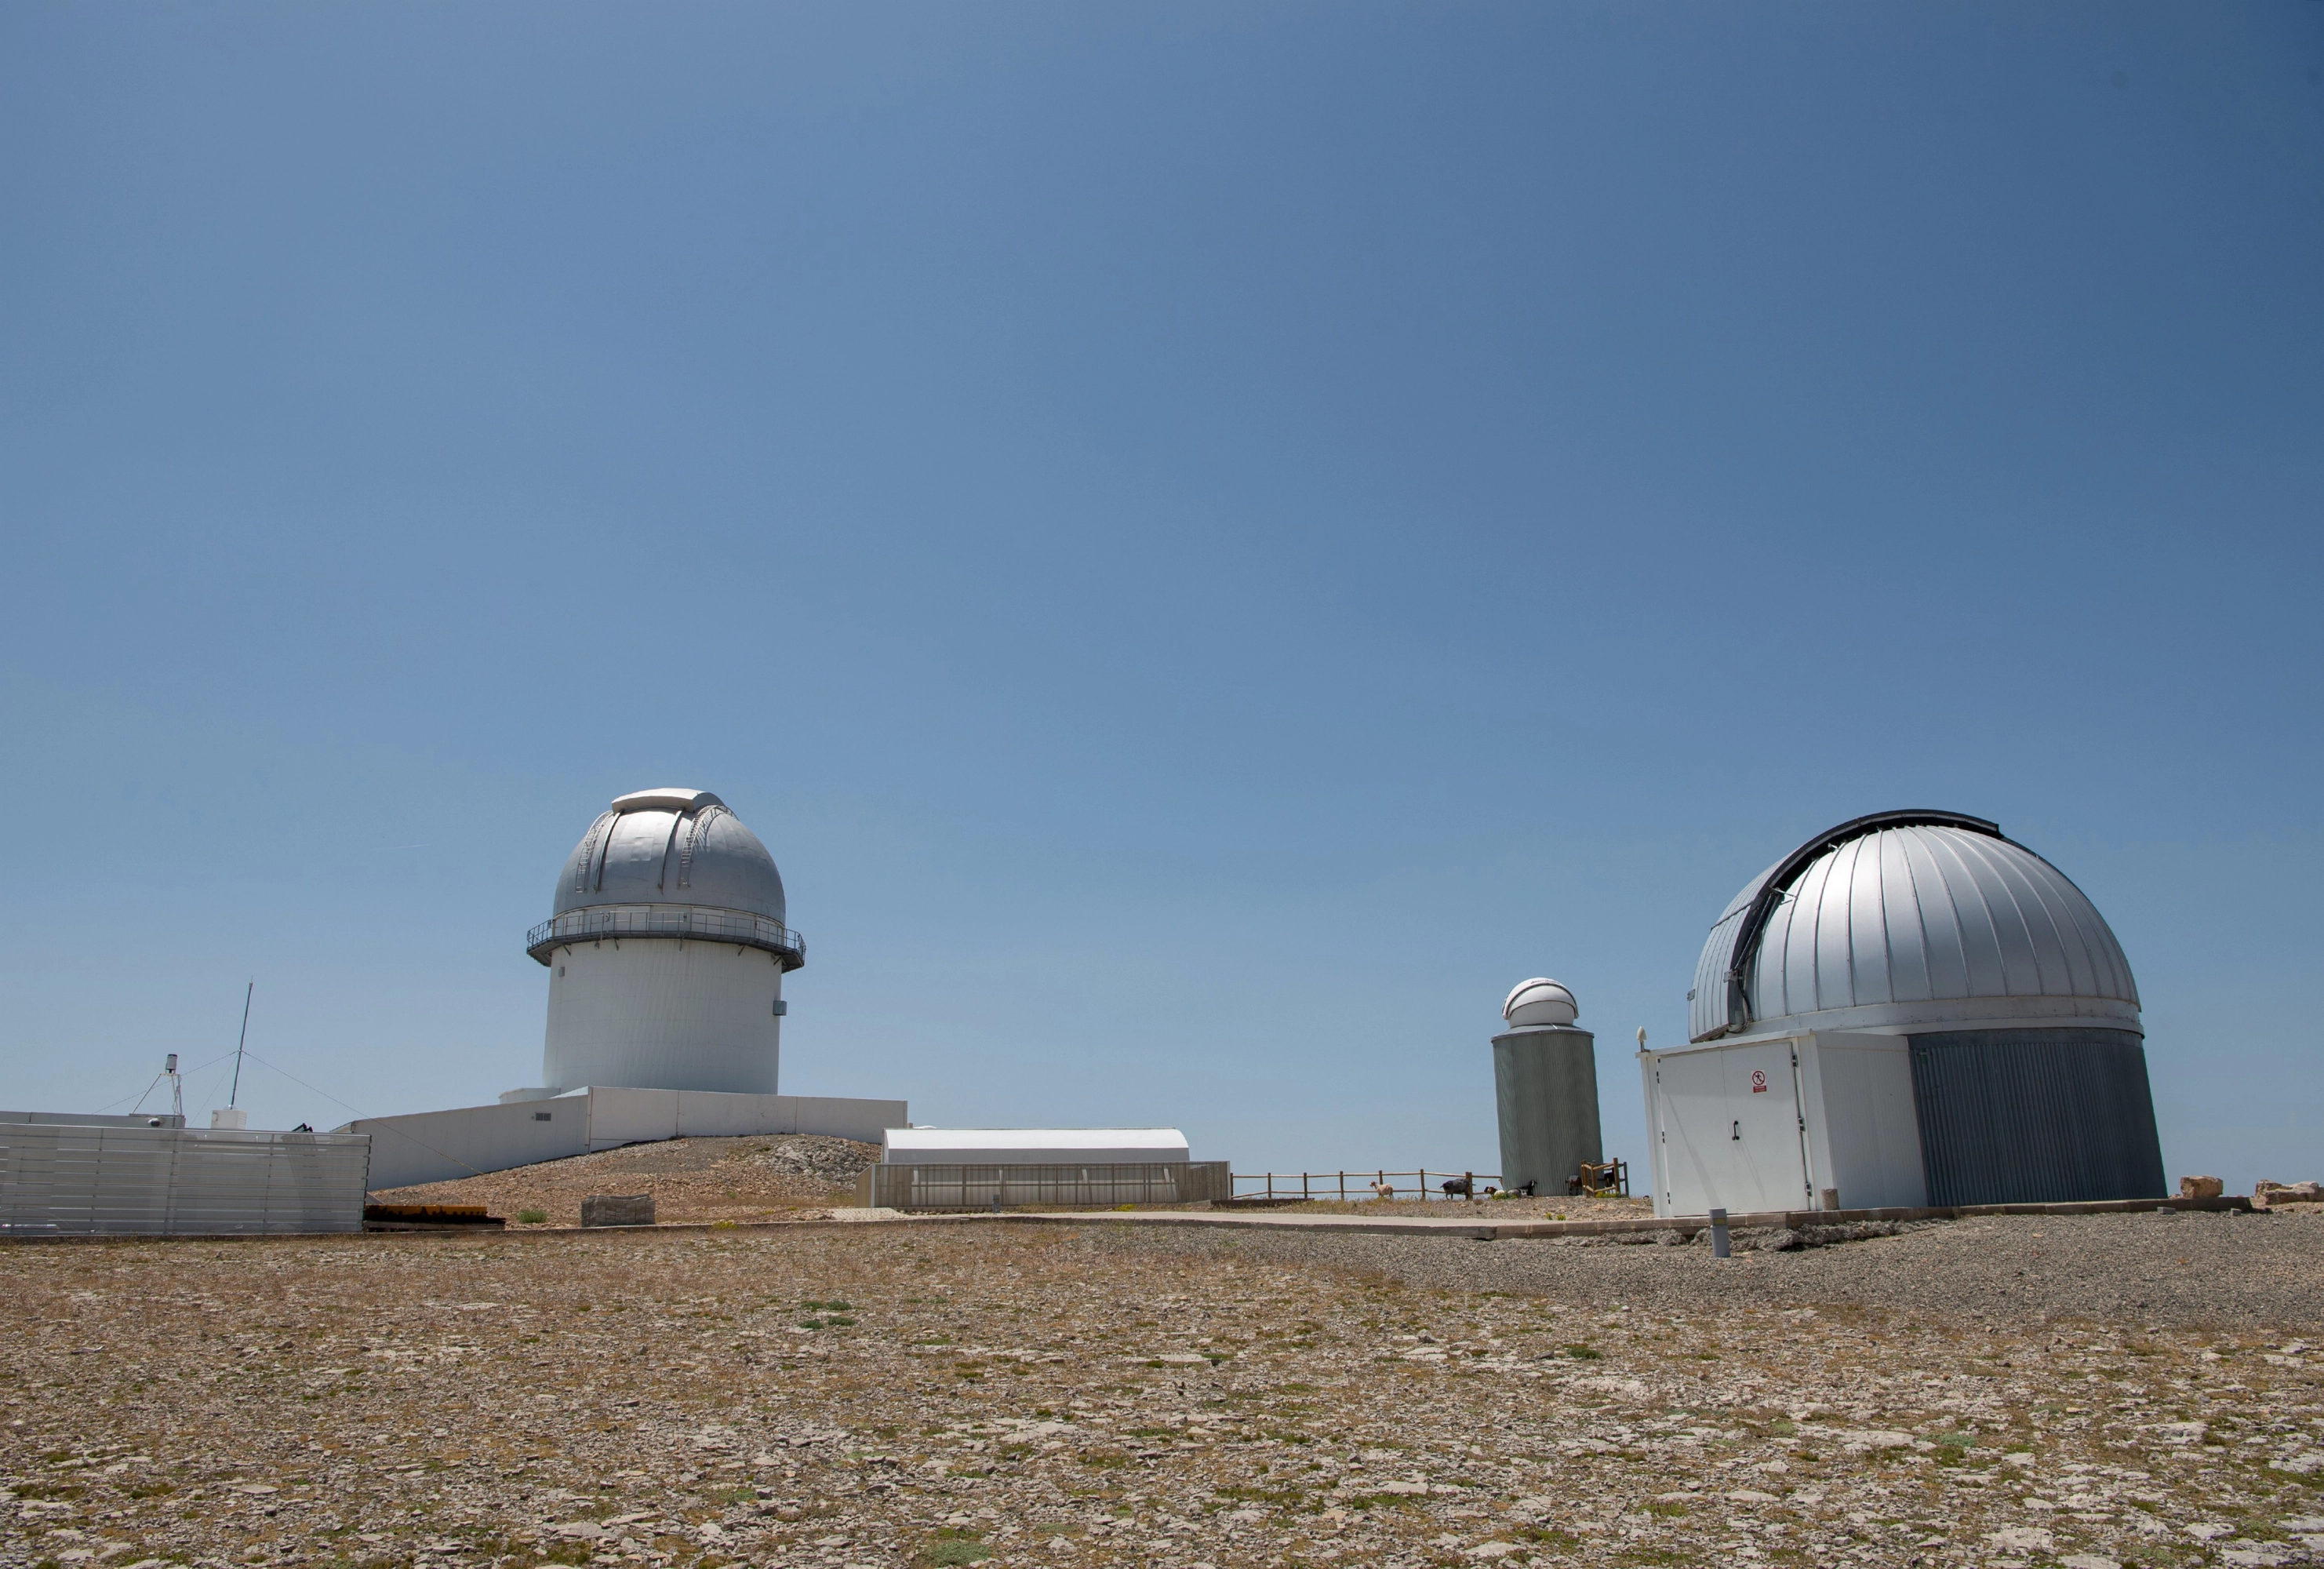 The Astrophysical Observatory of Javalambre in Arcos de las Salinas is managed by Cefca.